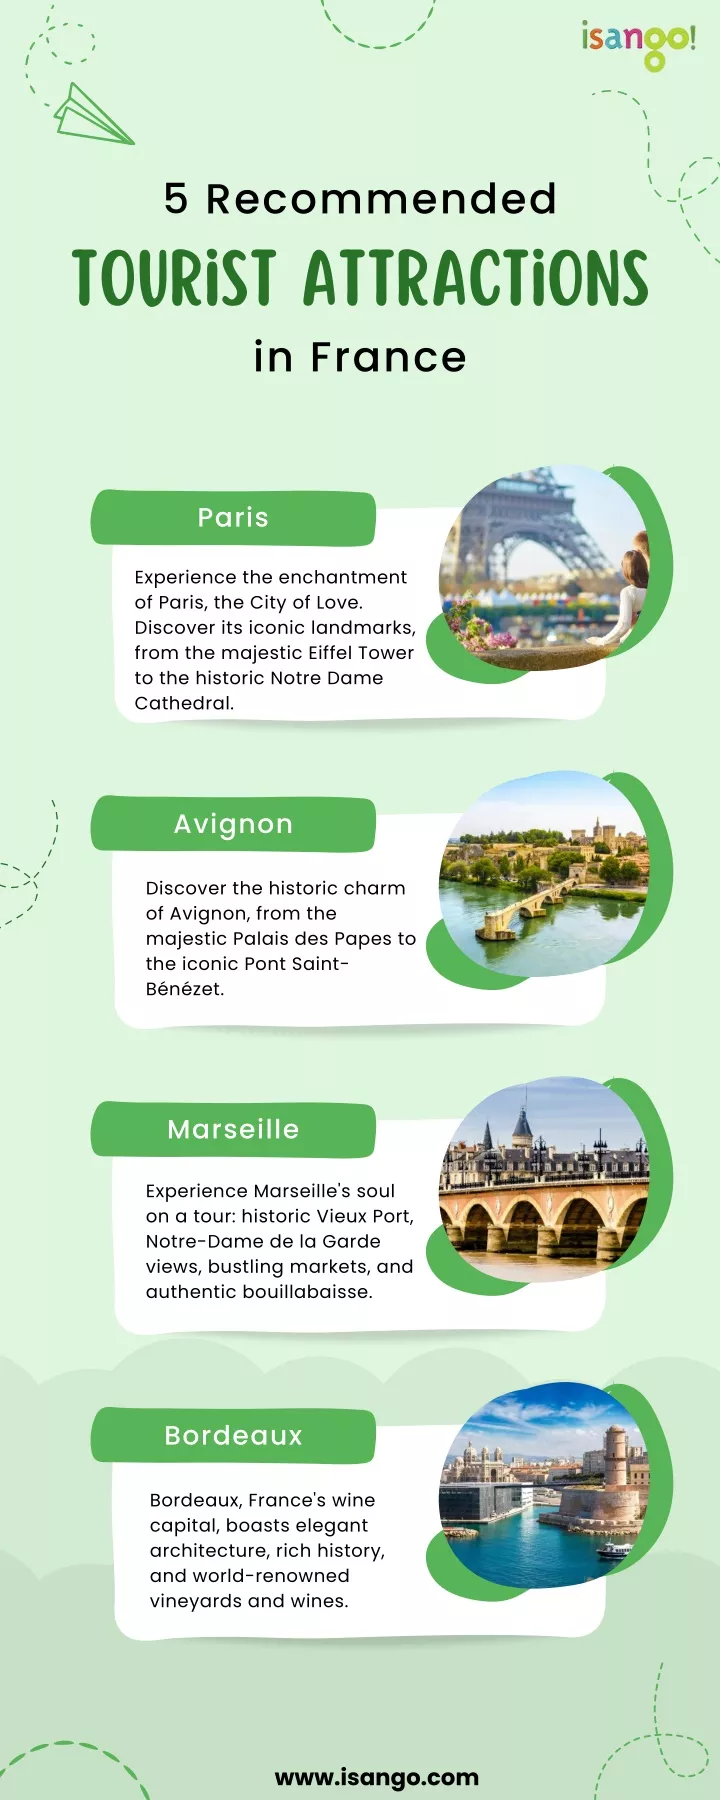 5 recommended tourist attractions in france